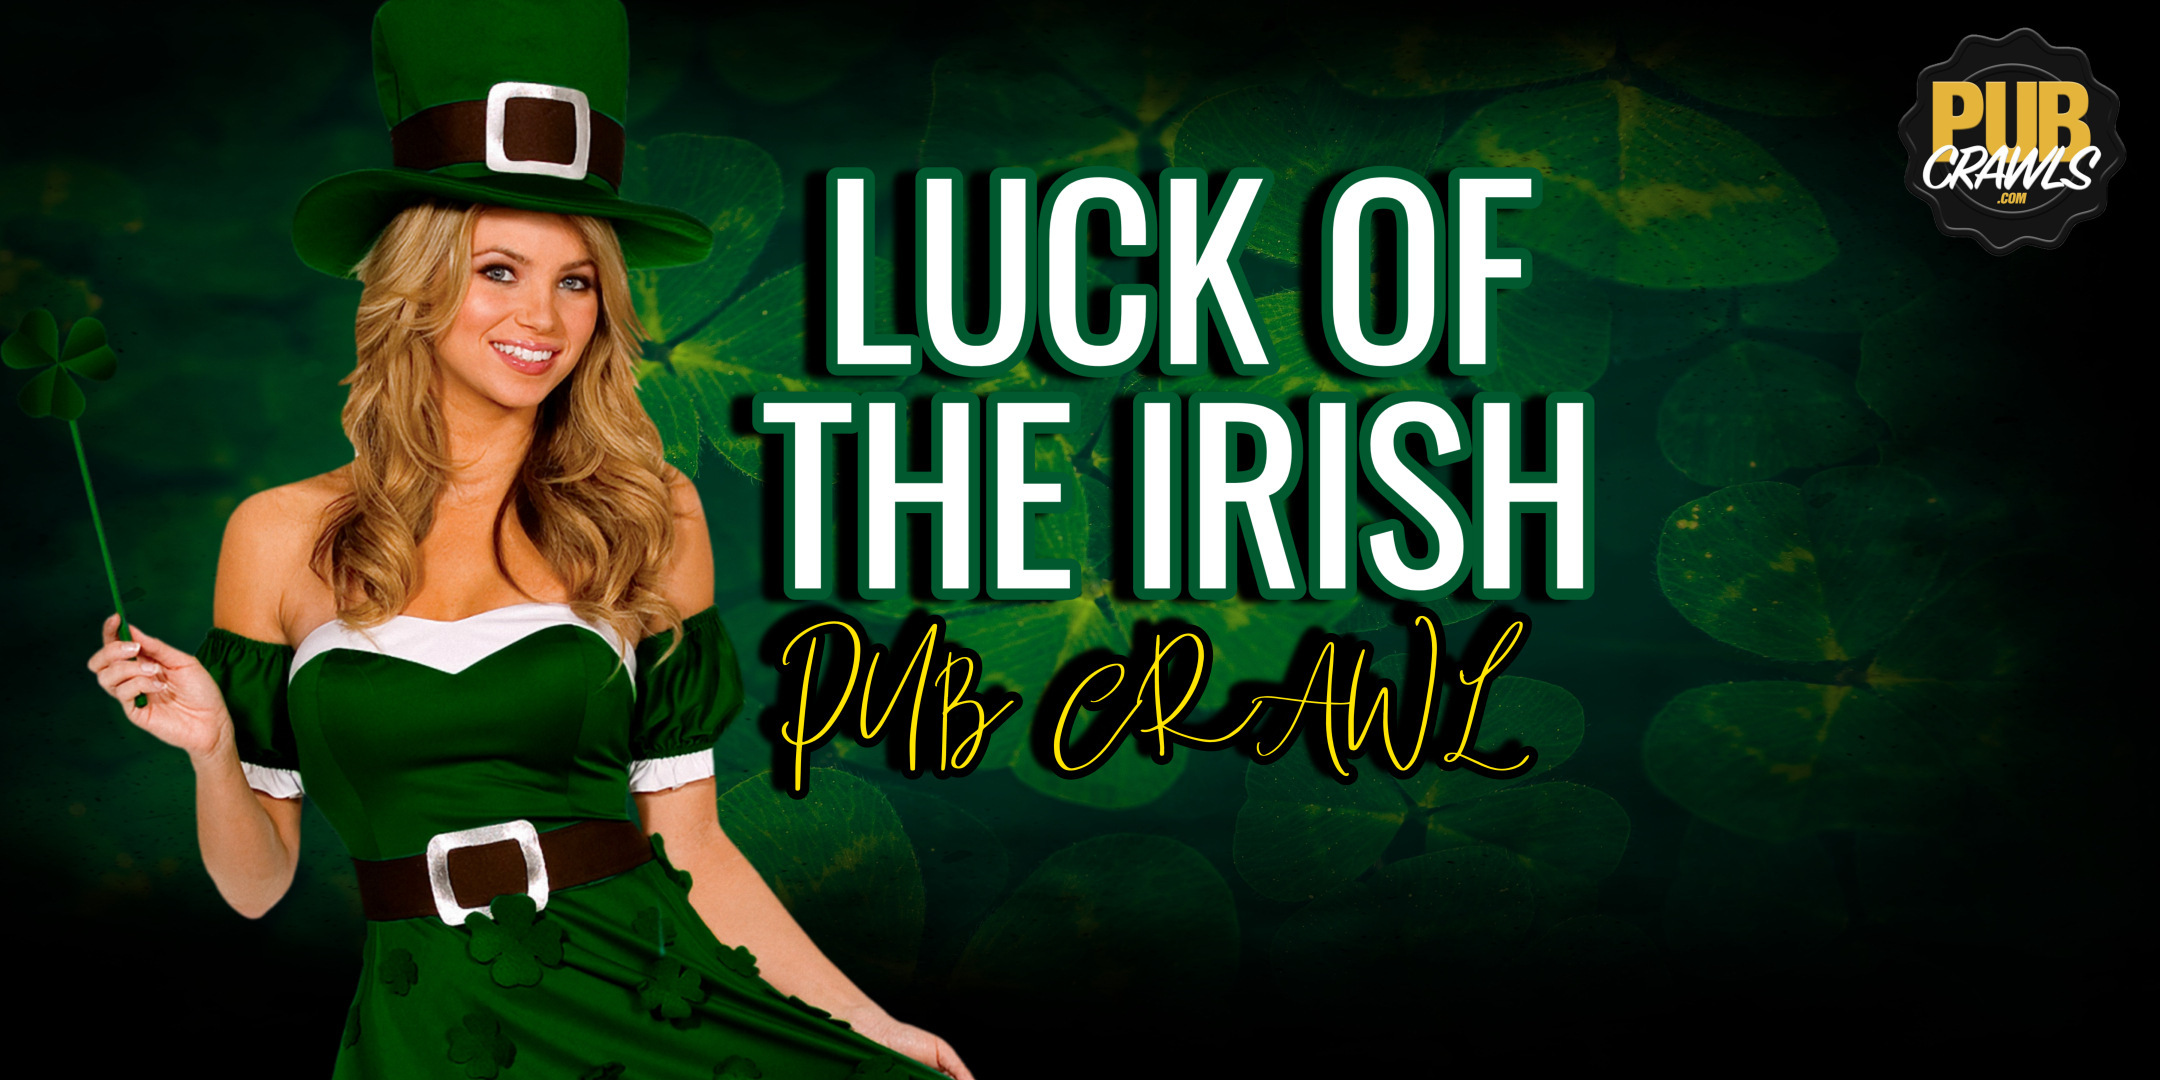 Raleigh Luck of the Irish St Patrick's Day Weekend Bar Crawl